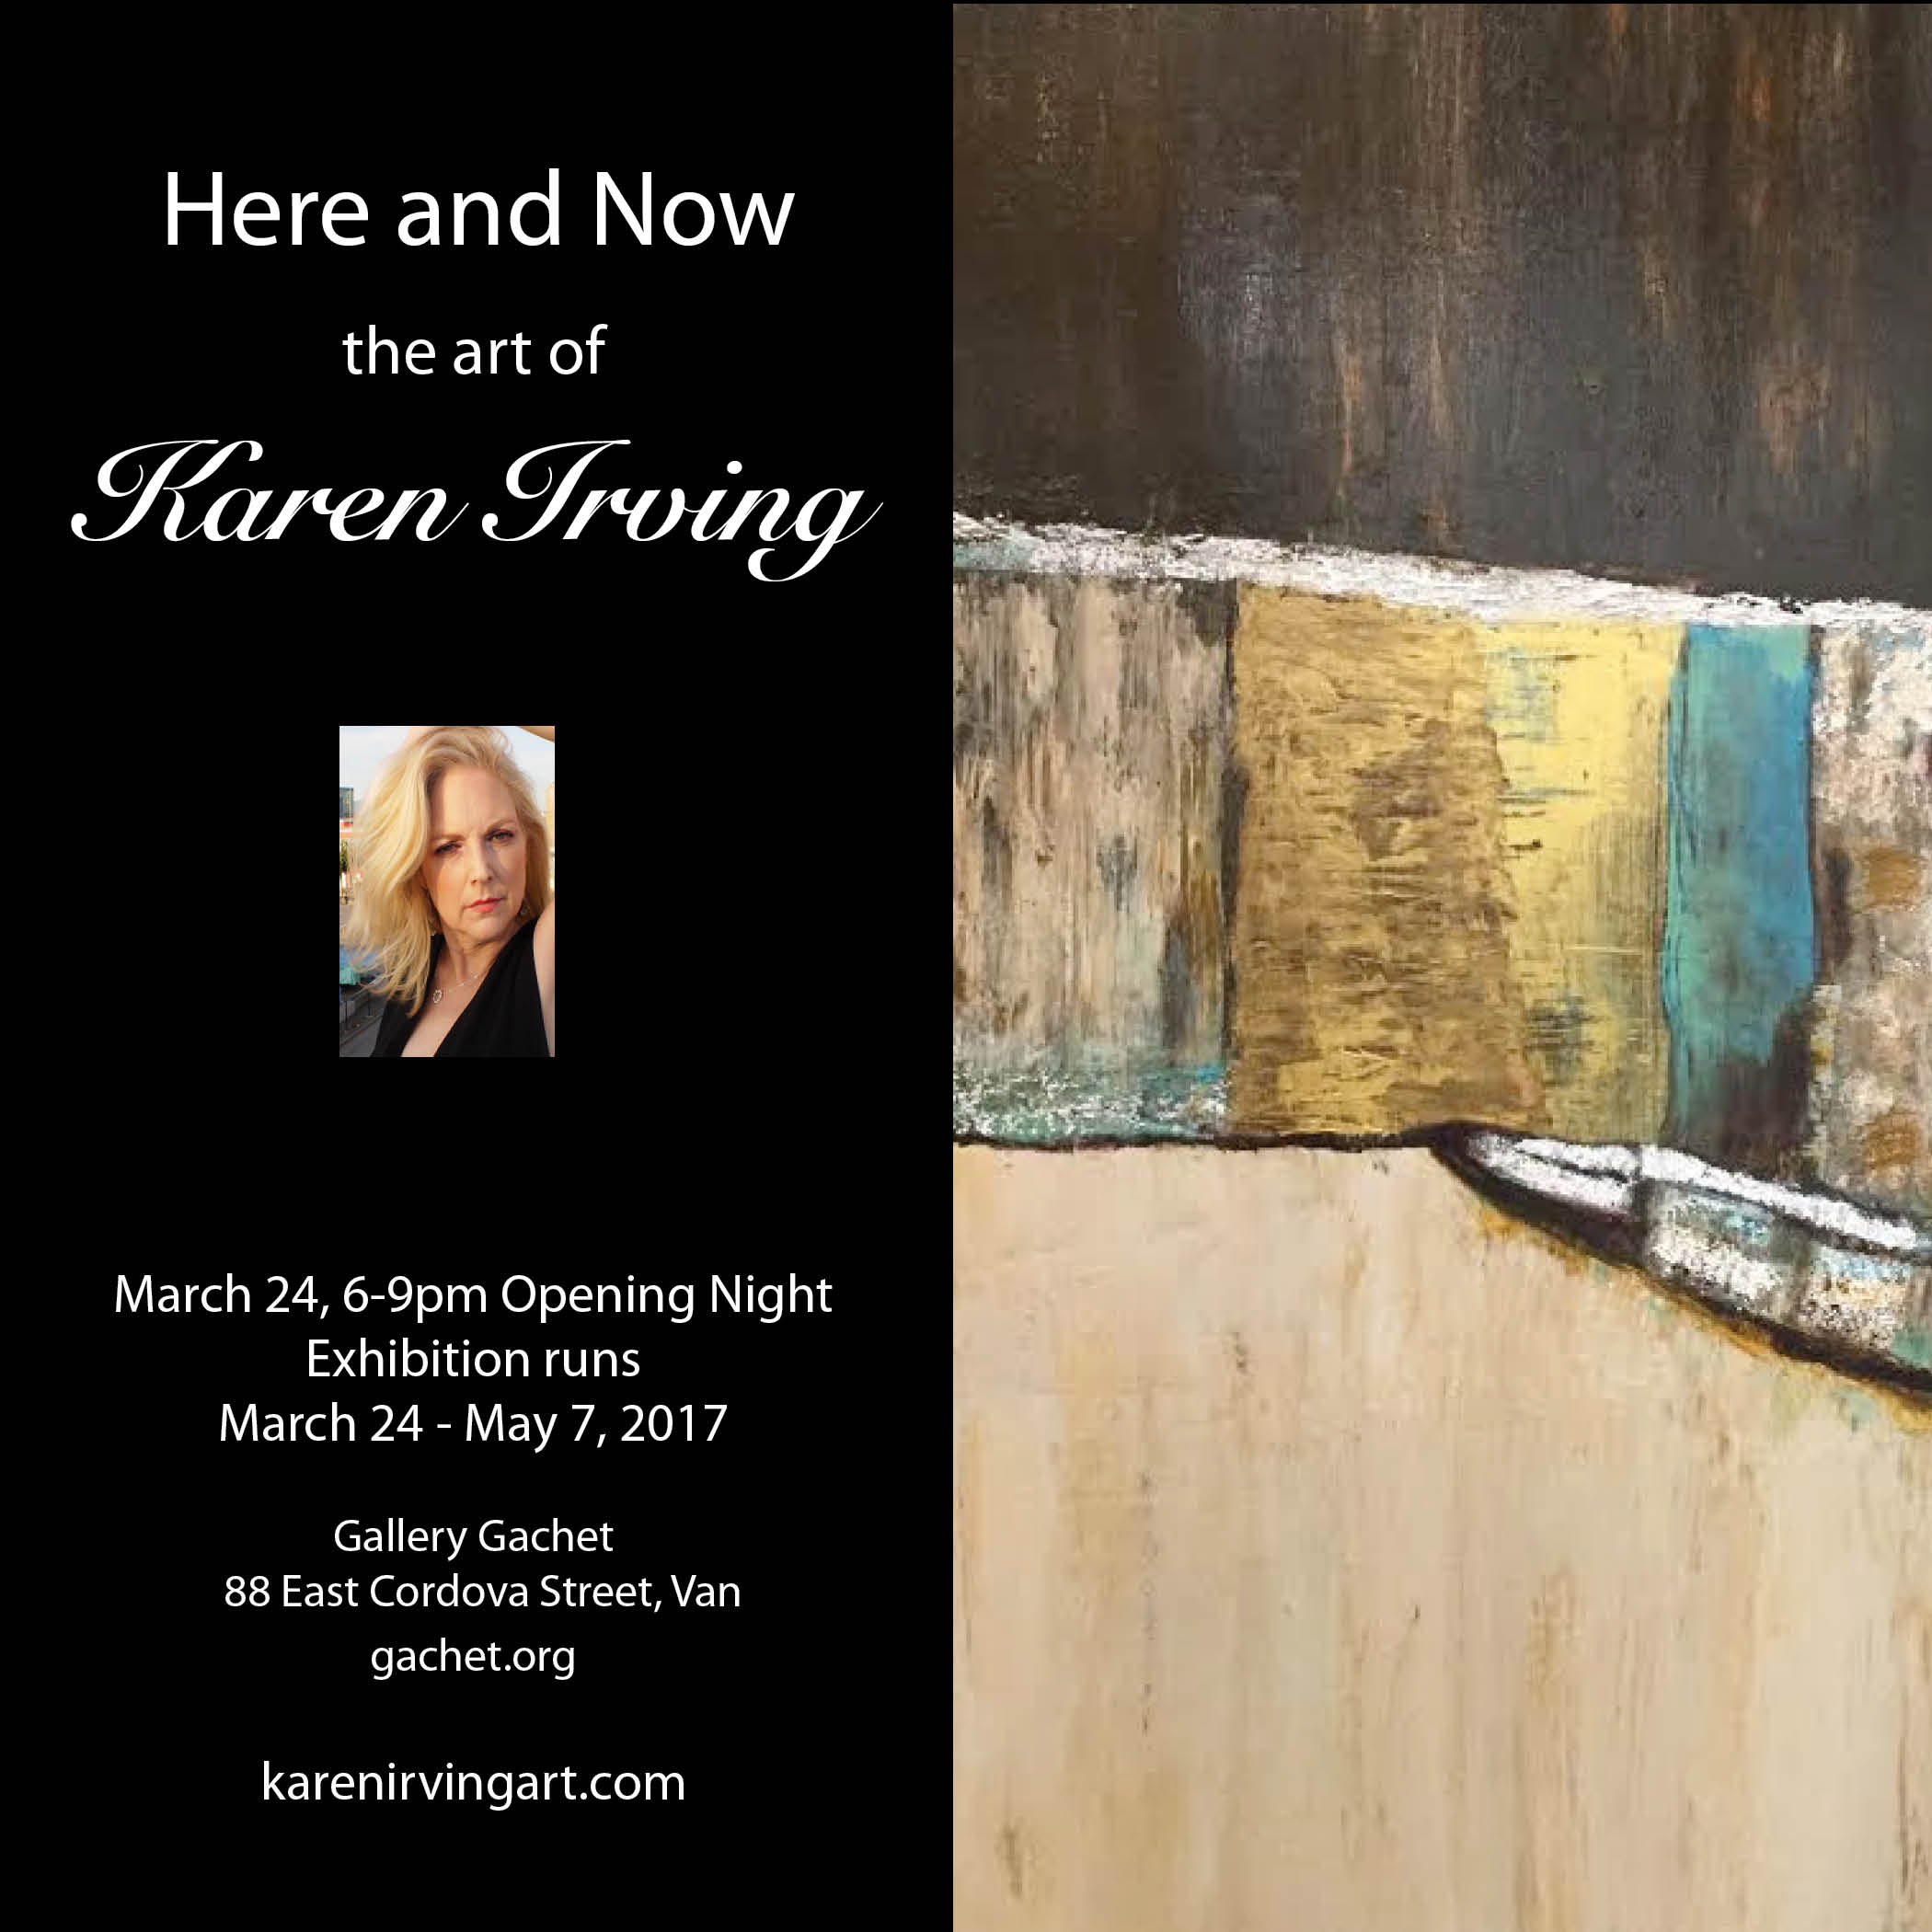 Here and Now: The Art of Karen Irving